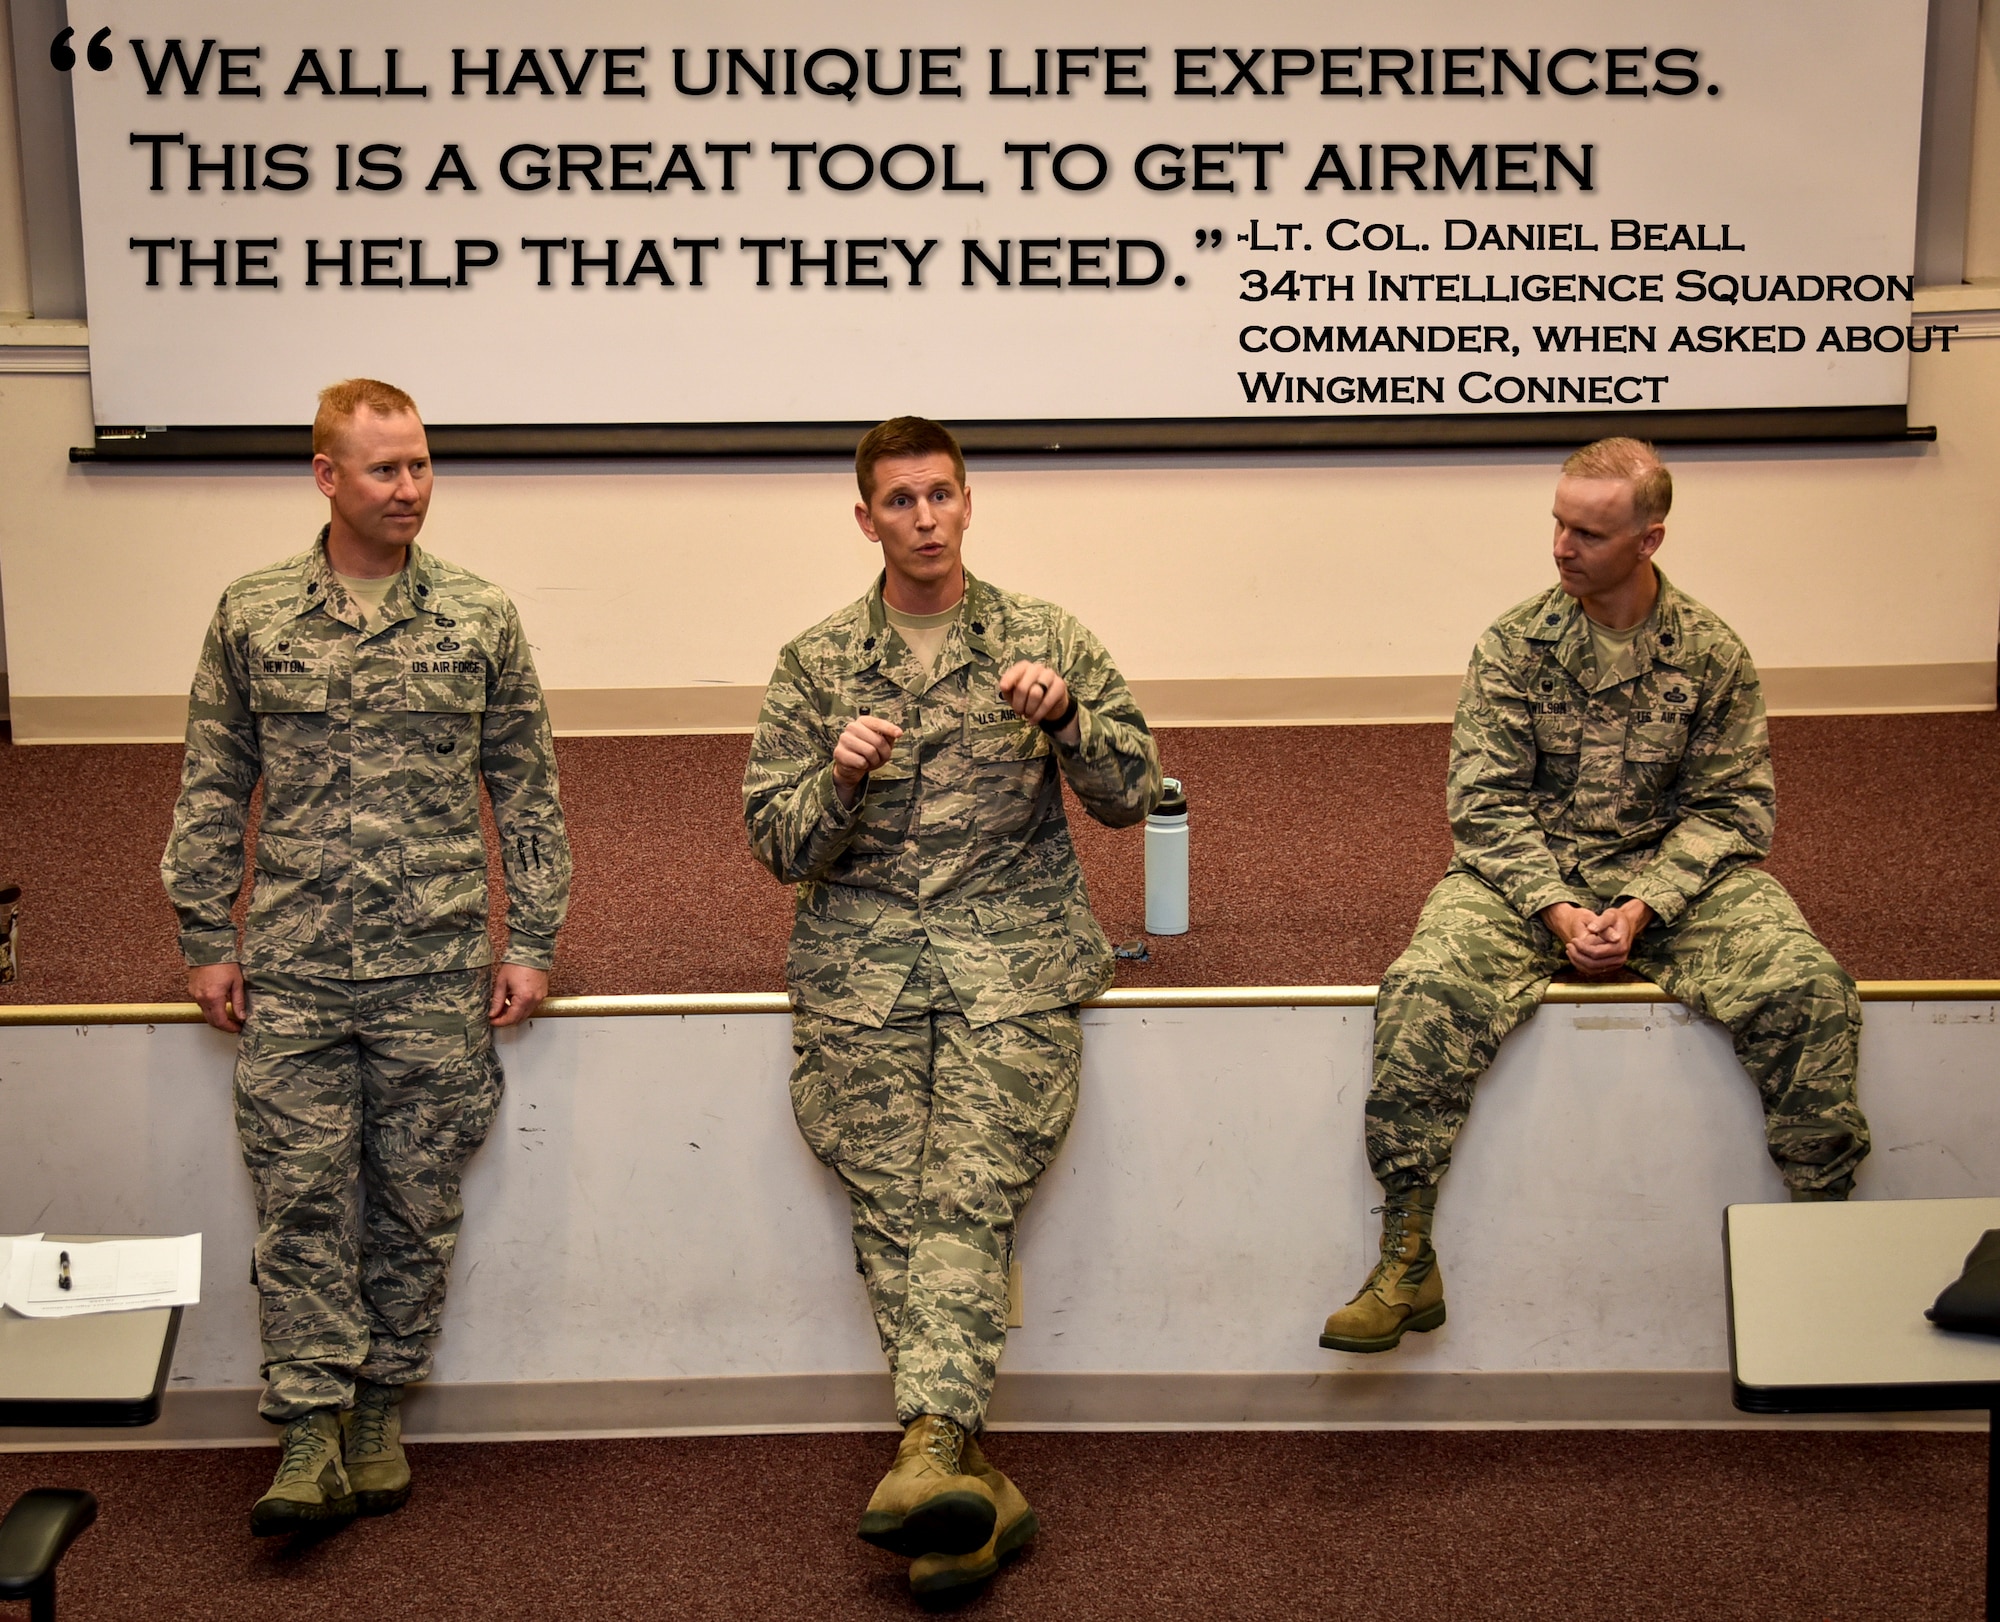 Lt. Col. Daniel Beall (middle), 34th Intelligence Squadron commander, shares his thoughts on the Wingmen Connect Program July 18, 2018, at Fort George G. Meade, Maryland. Wingmen Connect was formed to foster an Air Force culture where members are comfortable seeking and receiving help from supporting organizations and experienced Wingmen across all ranks for a healthier, more resilient Air Force. (U.S. Air Force graphic by Staff Sgt. AJ Hyatt)